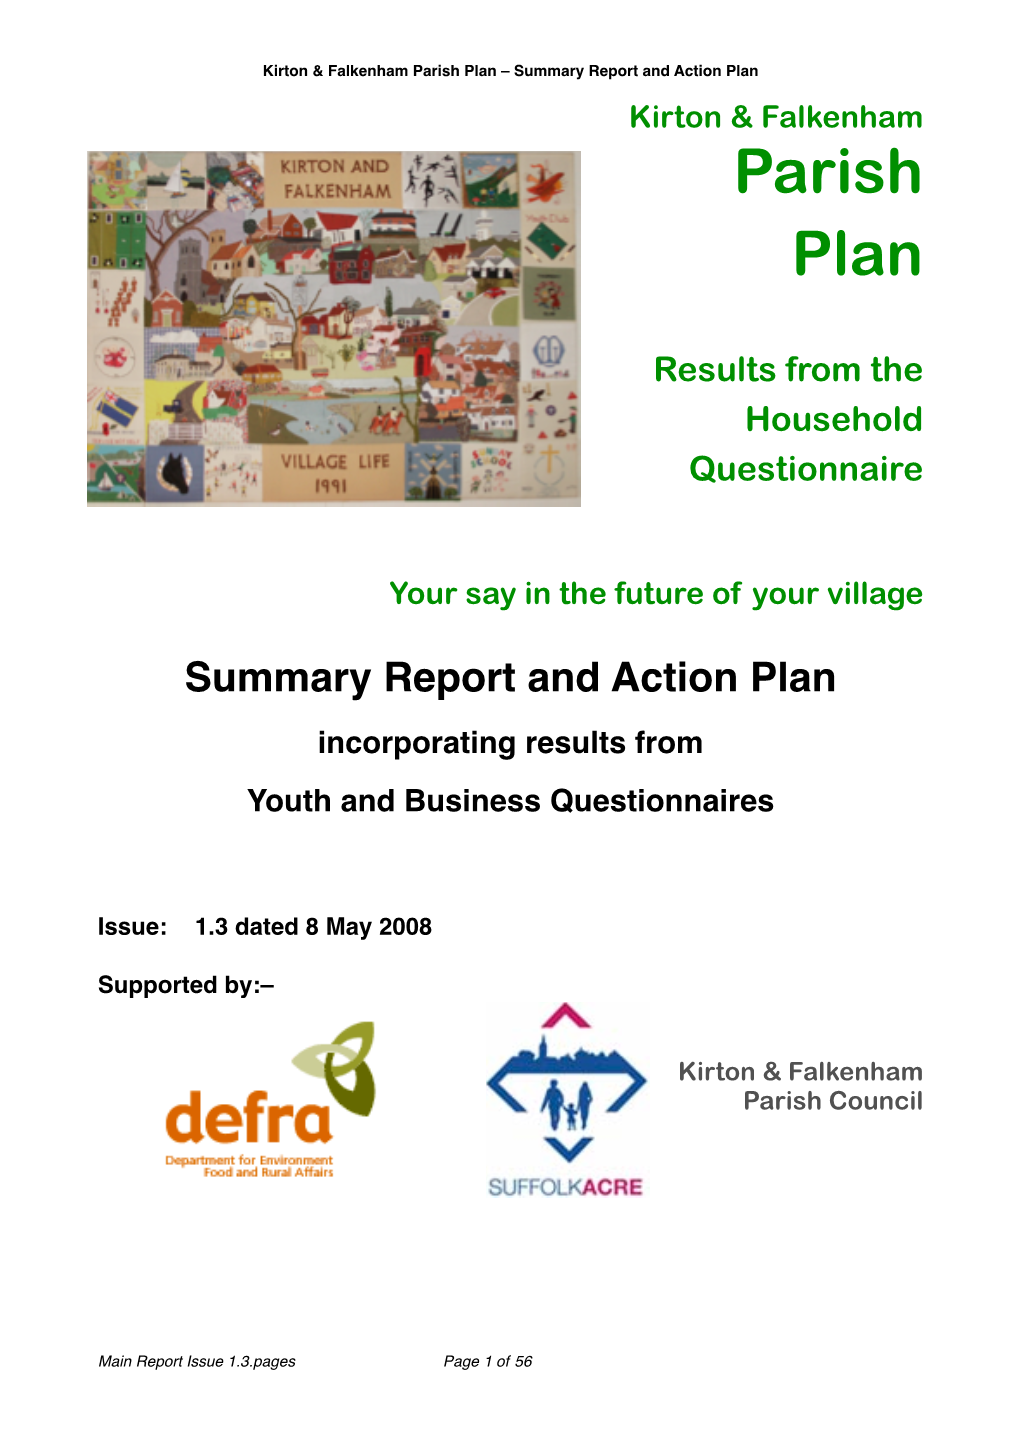 Main Report Issue 1.3.Pages Page 1 of 56 Kirton & Falkenham Parish Plan – Summary Report and Action Plan